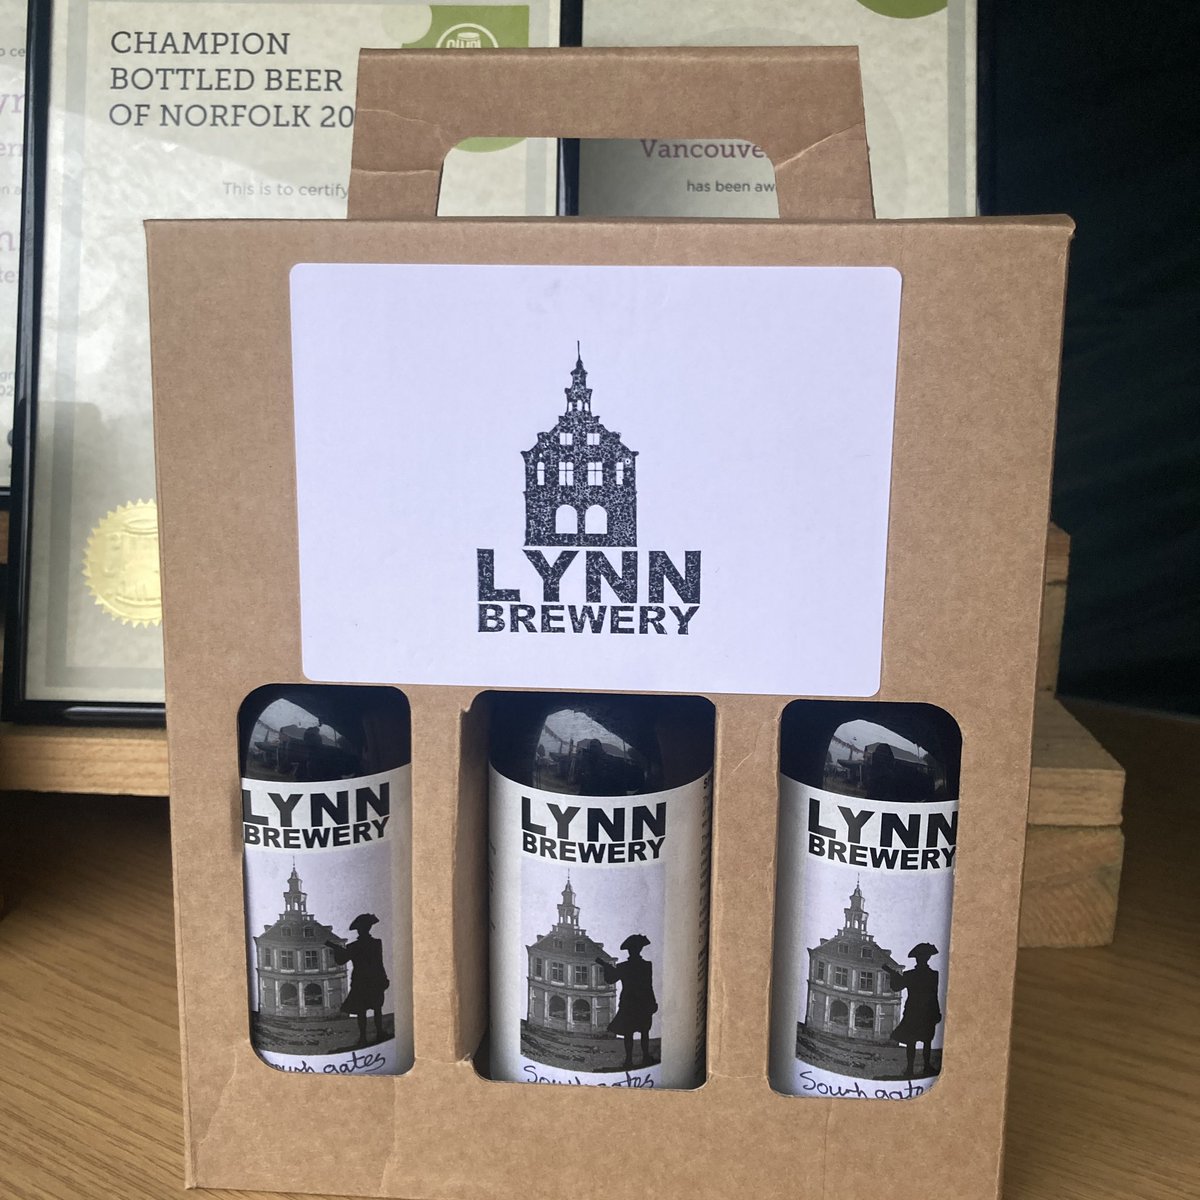 What’s better than a bottle of stout for Christmas? 3 bottles! In a gift box! Get yours today at North Wootton Christmas Fair - from 10 until 5

(And it doesn’t have to be stout, many other beers available!) @northwoottonvh